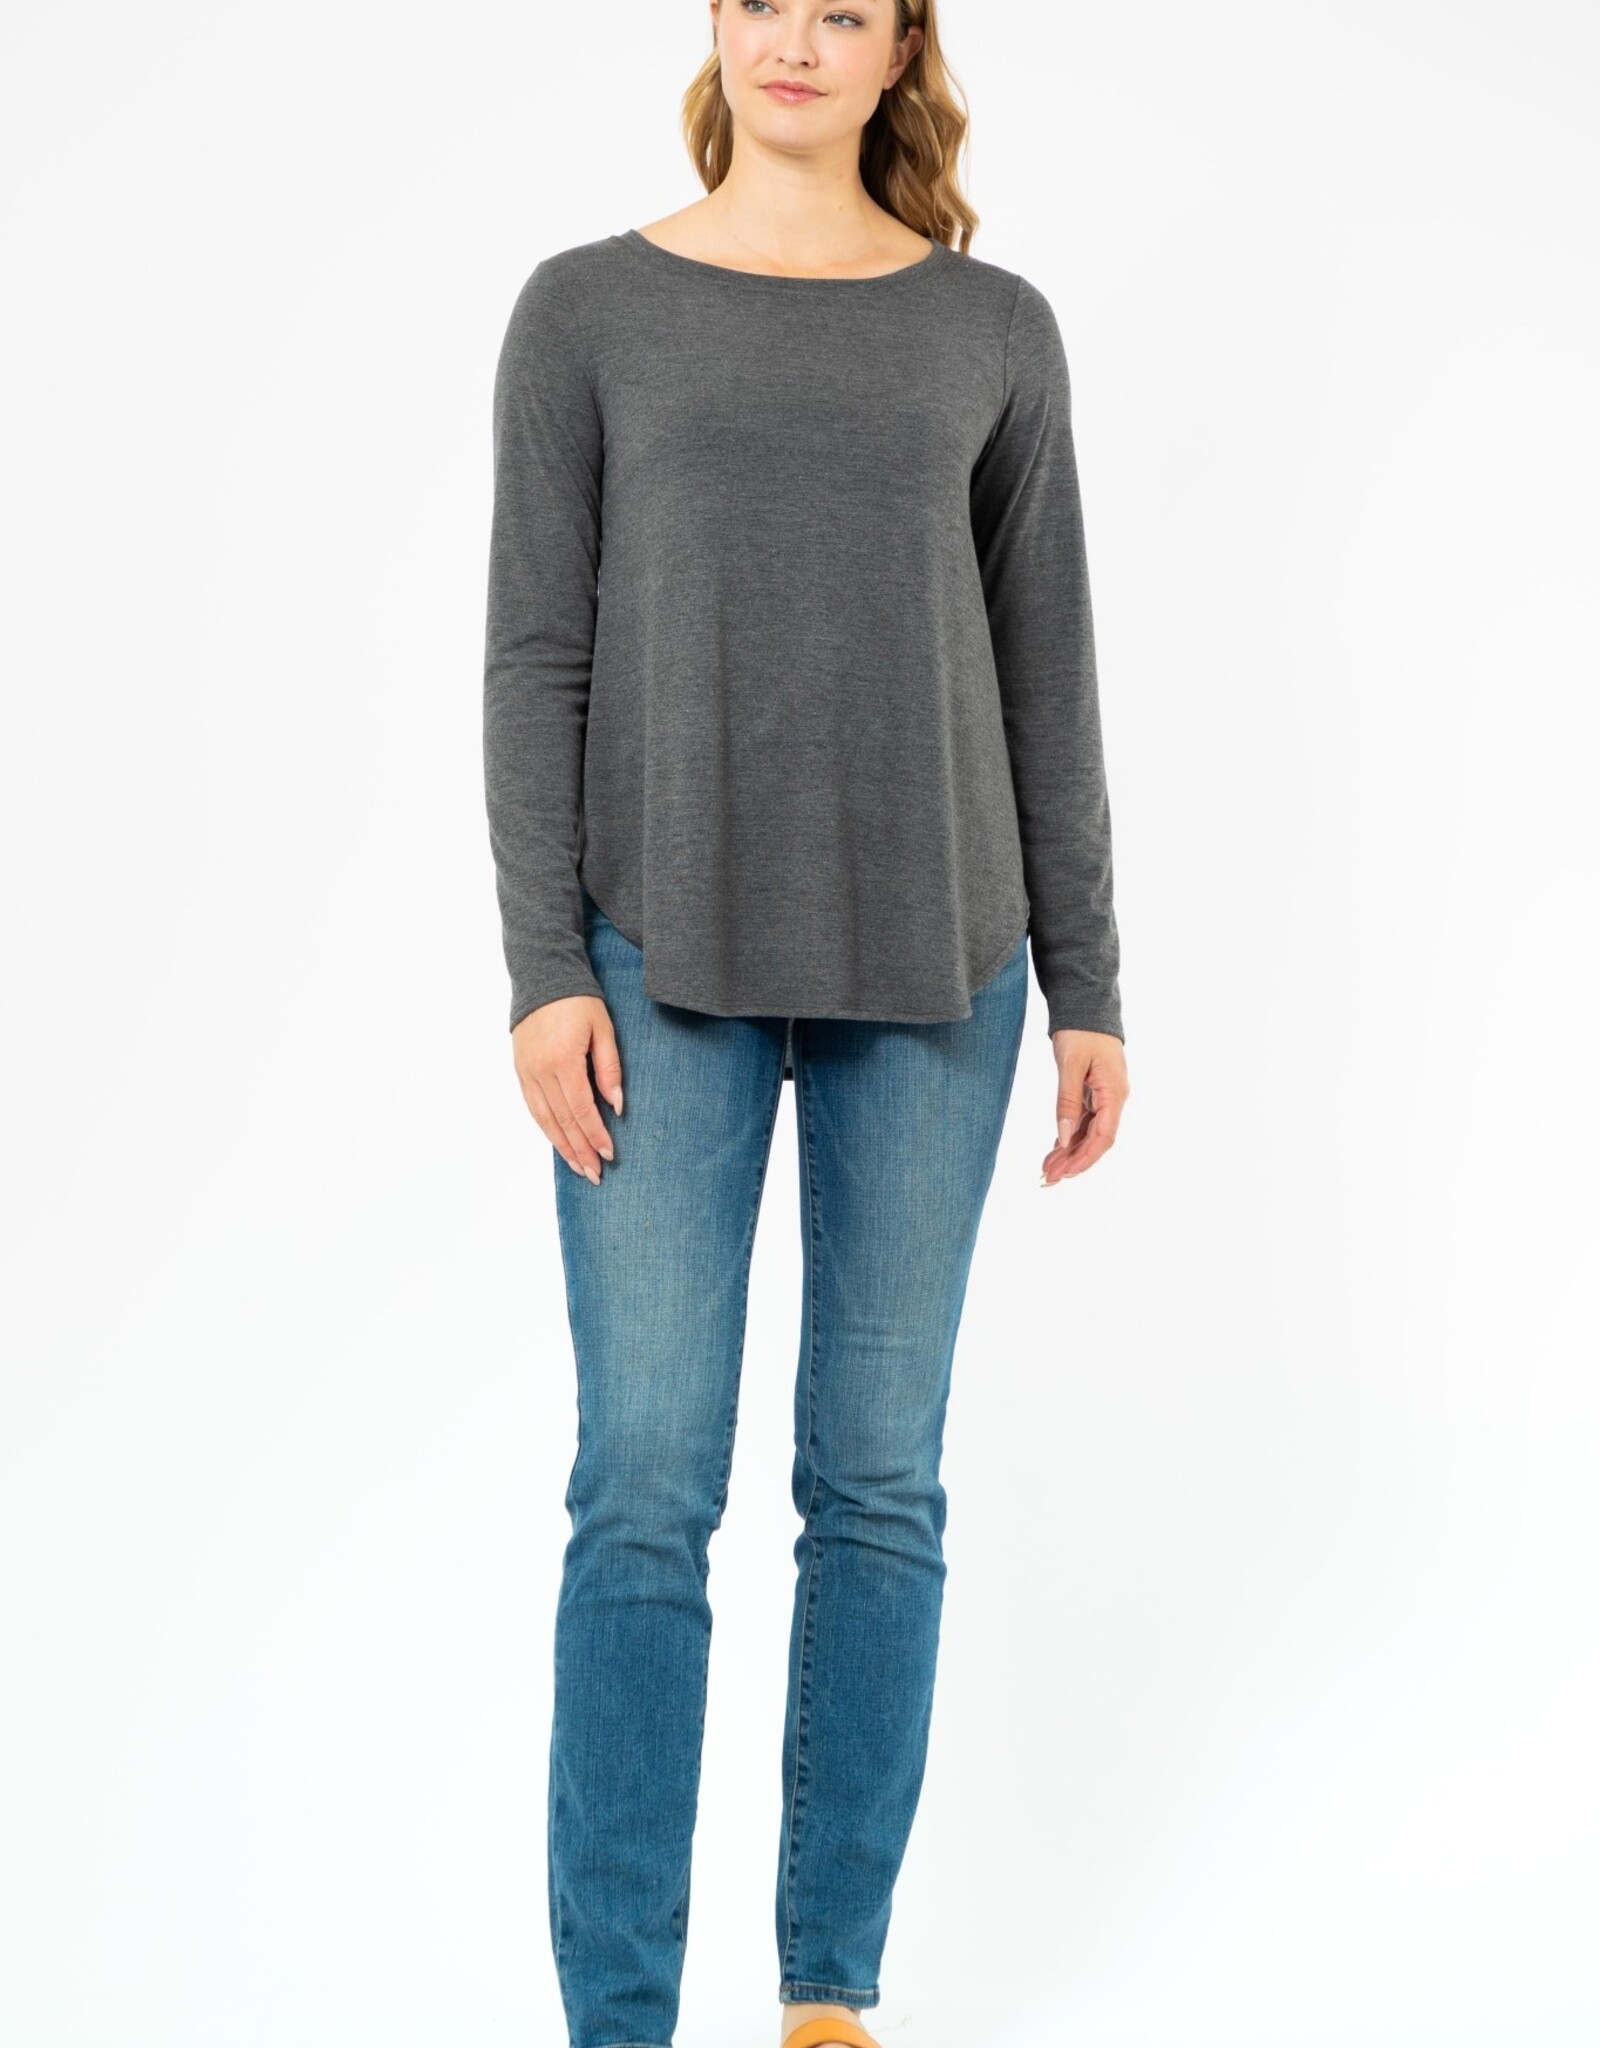 Miss Bliss Solid LS Top- Charcoal